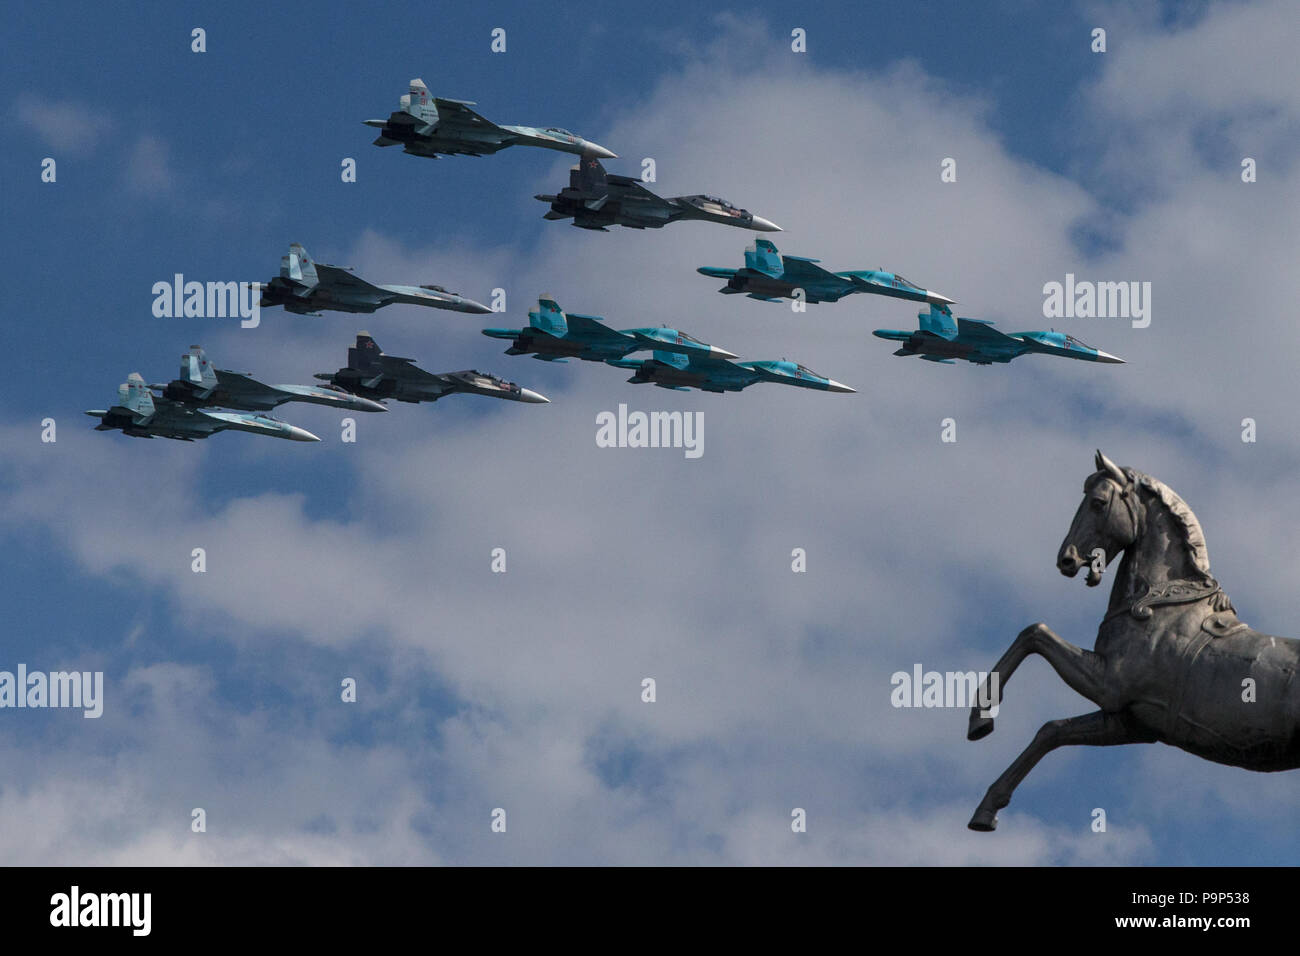 Ten Sukhoi fighter jets of Russian Air Force (four Su-27, four Su-34 and two Su-35) fly in formation over Moscow hippodrome during a rehearsal for the Stock Photo